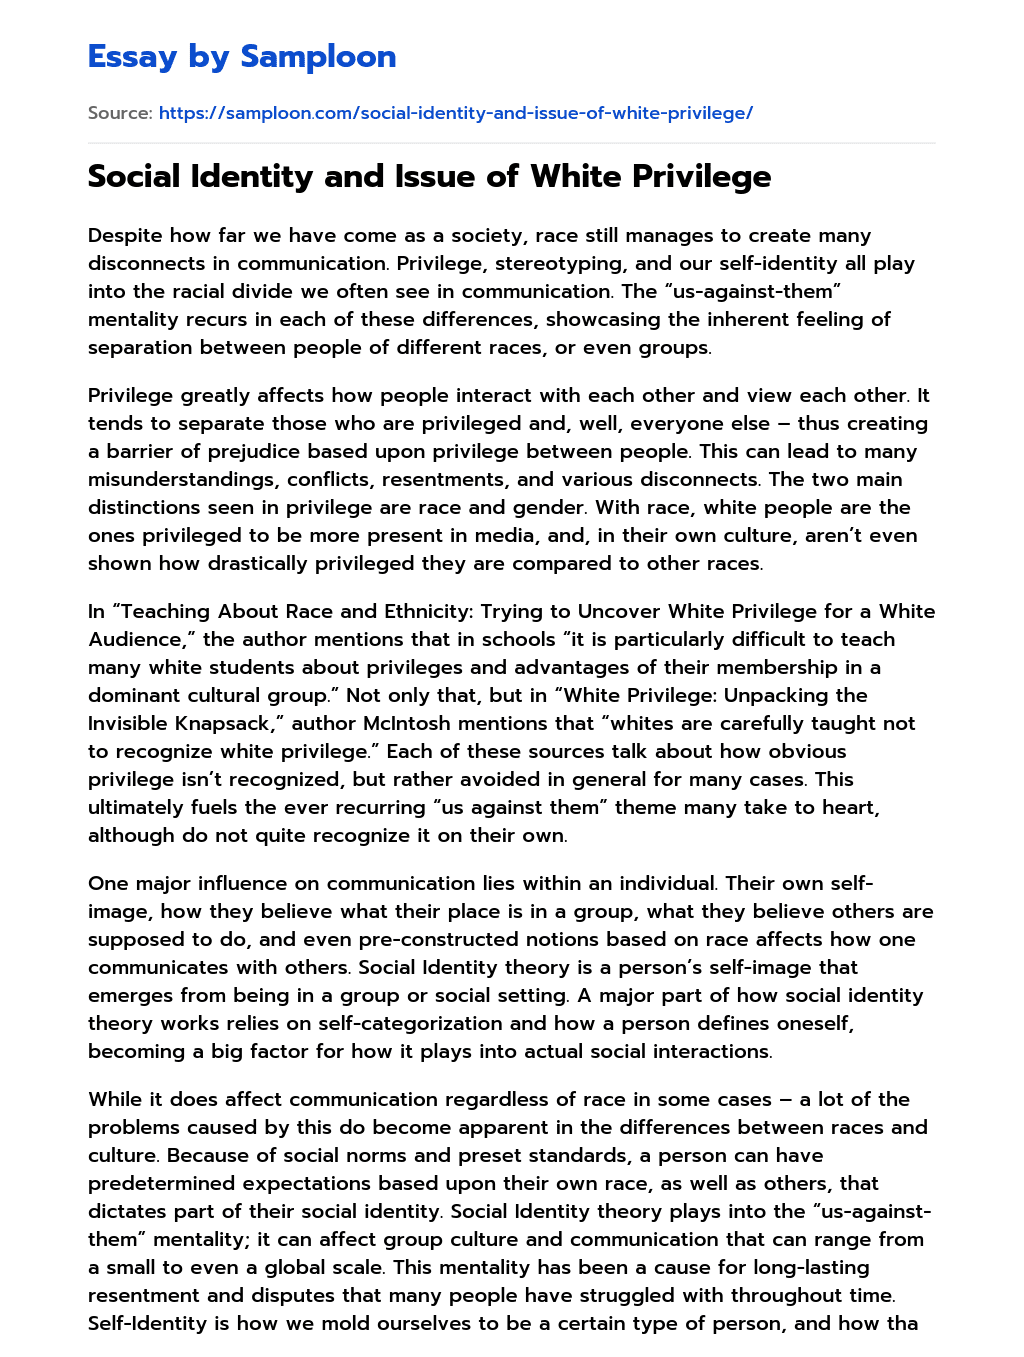 Social Identity and Issue of White Privilege essay